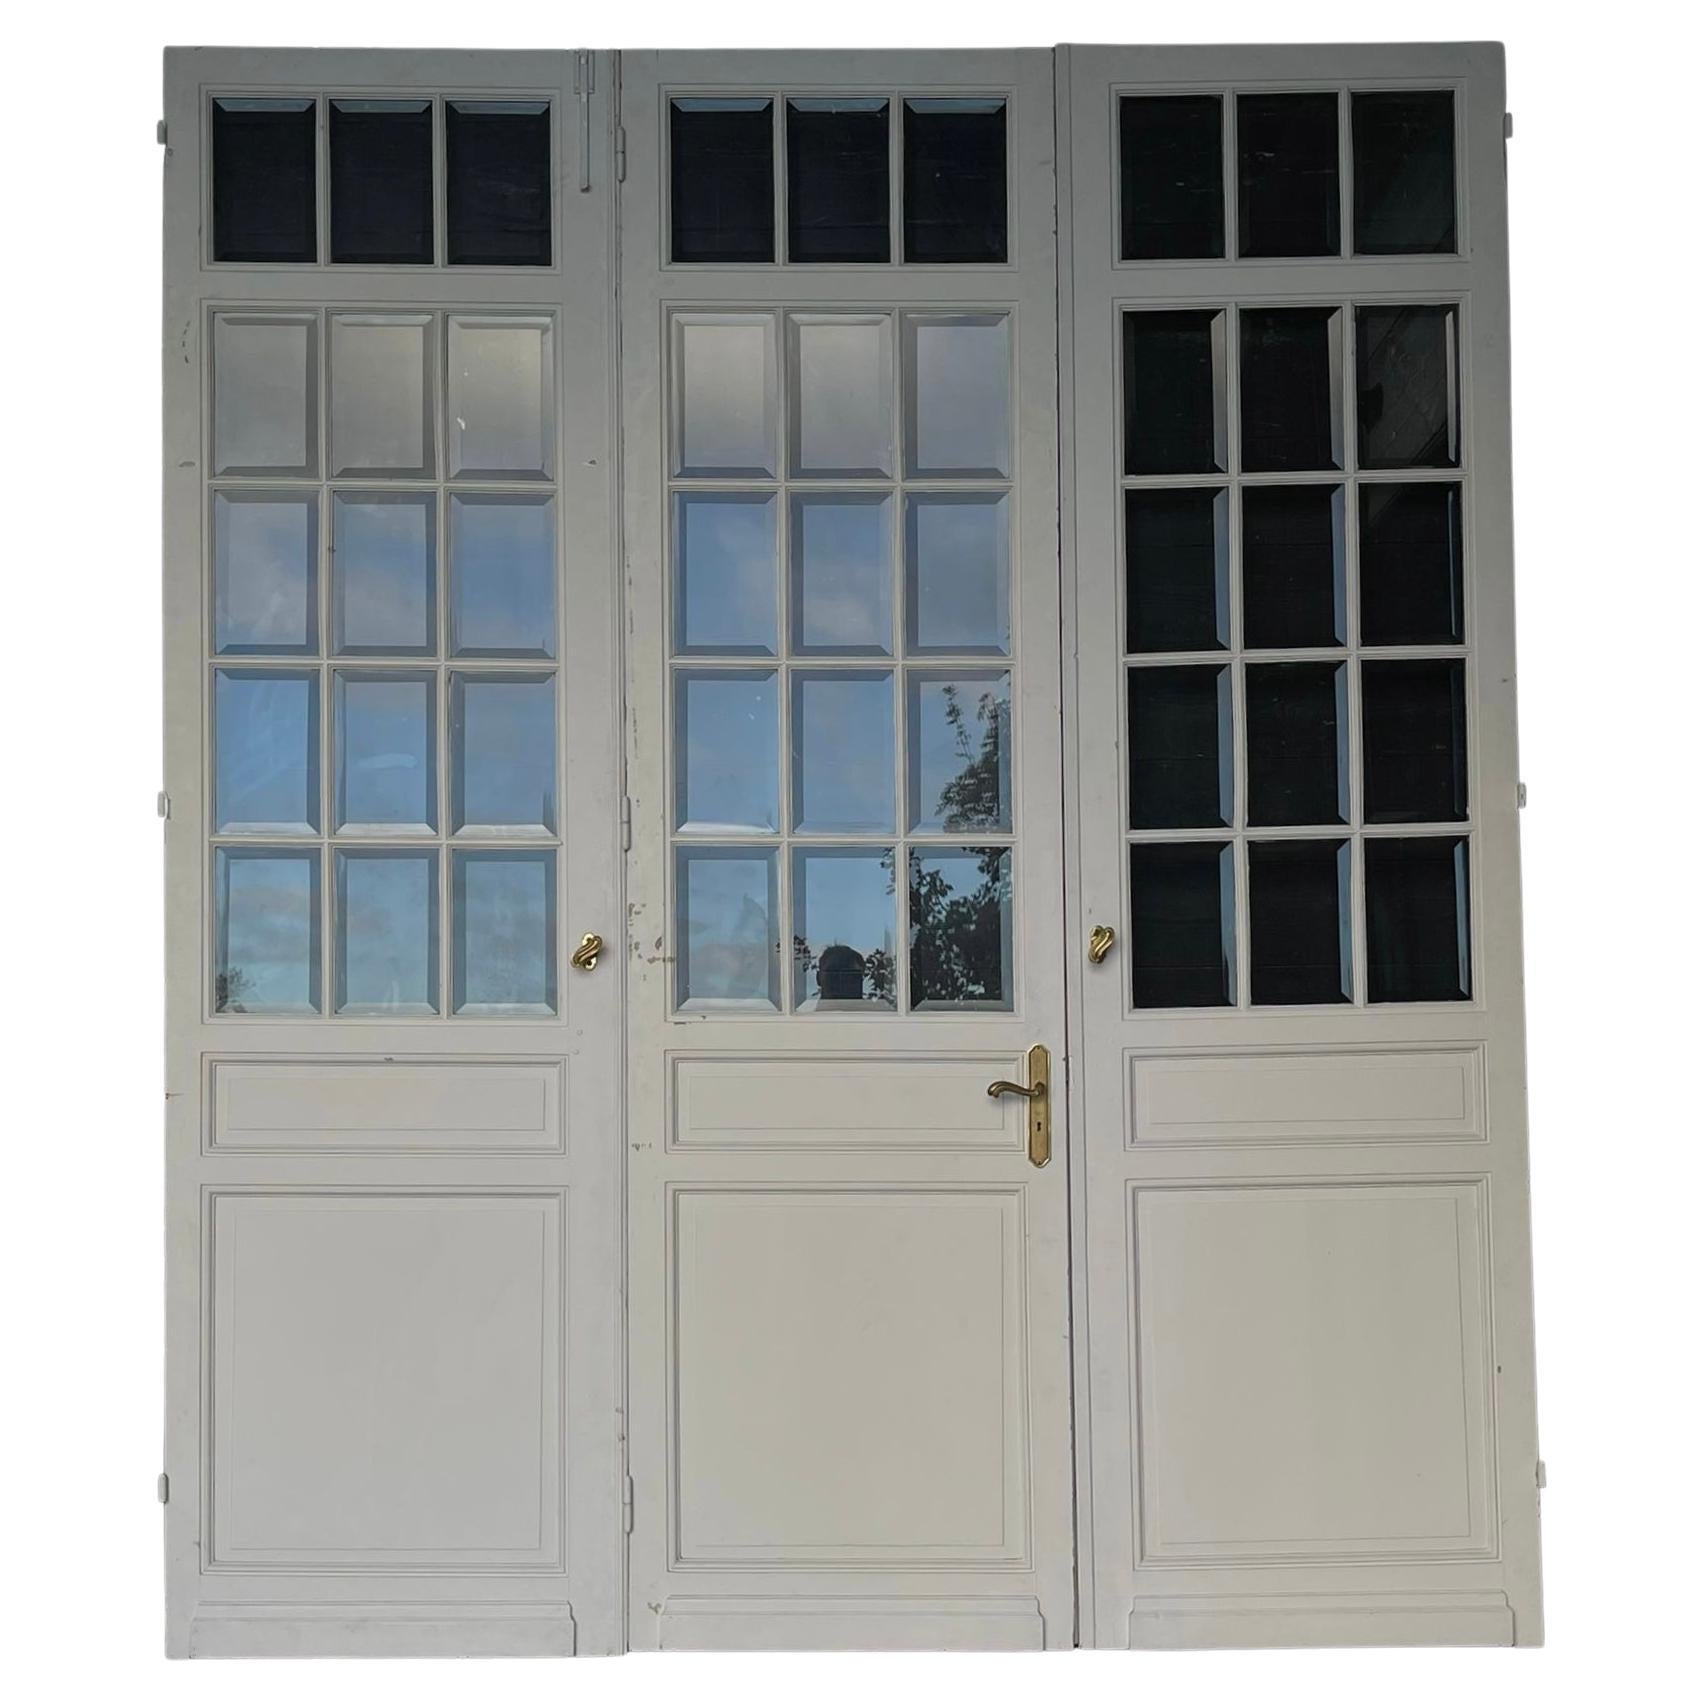 Set 3 French Chateau Doors